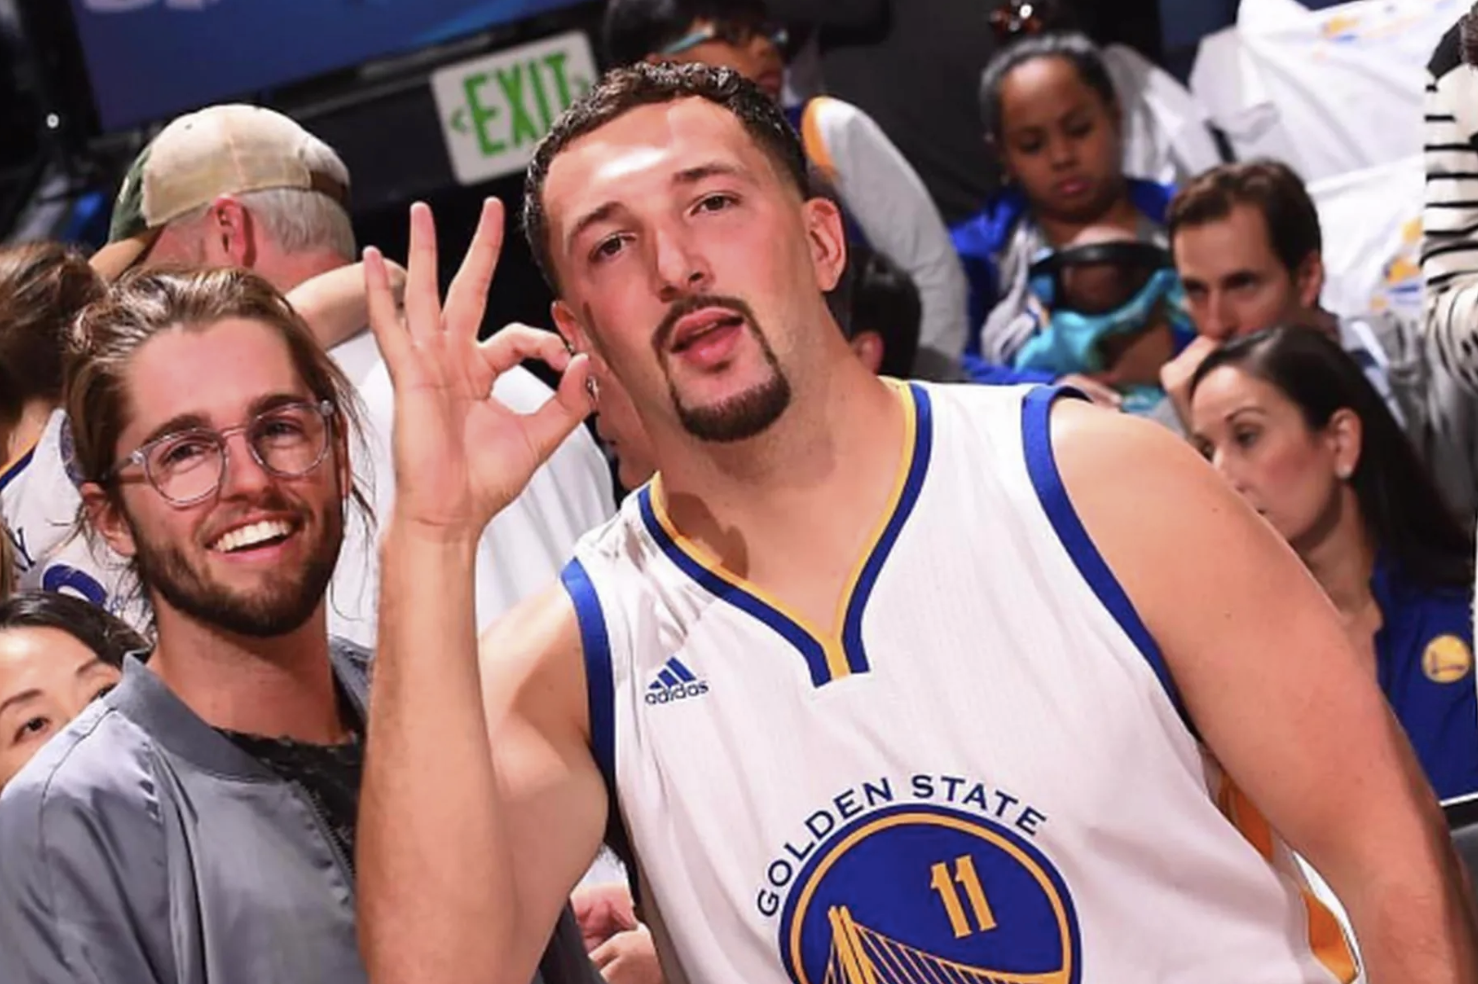 Fake Klay convinced Warriors fans that he was the real Klay Thompson